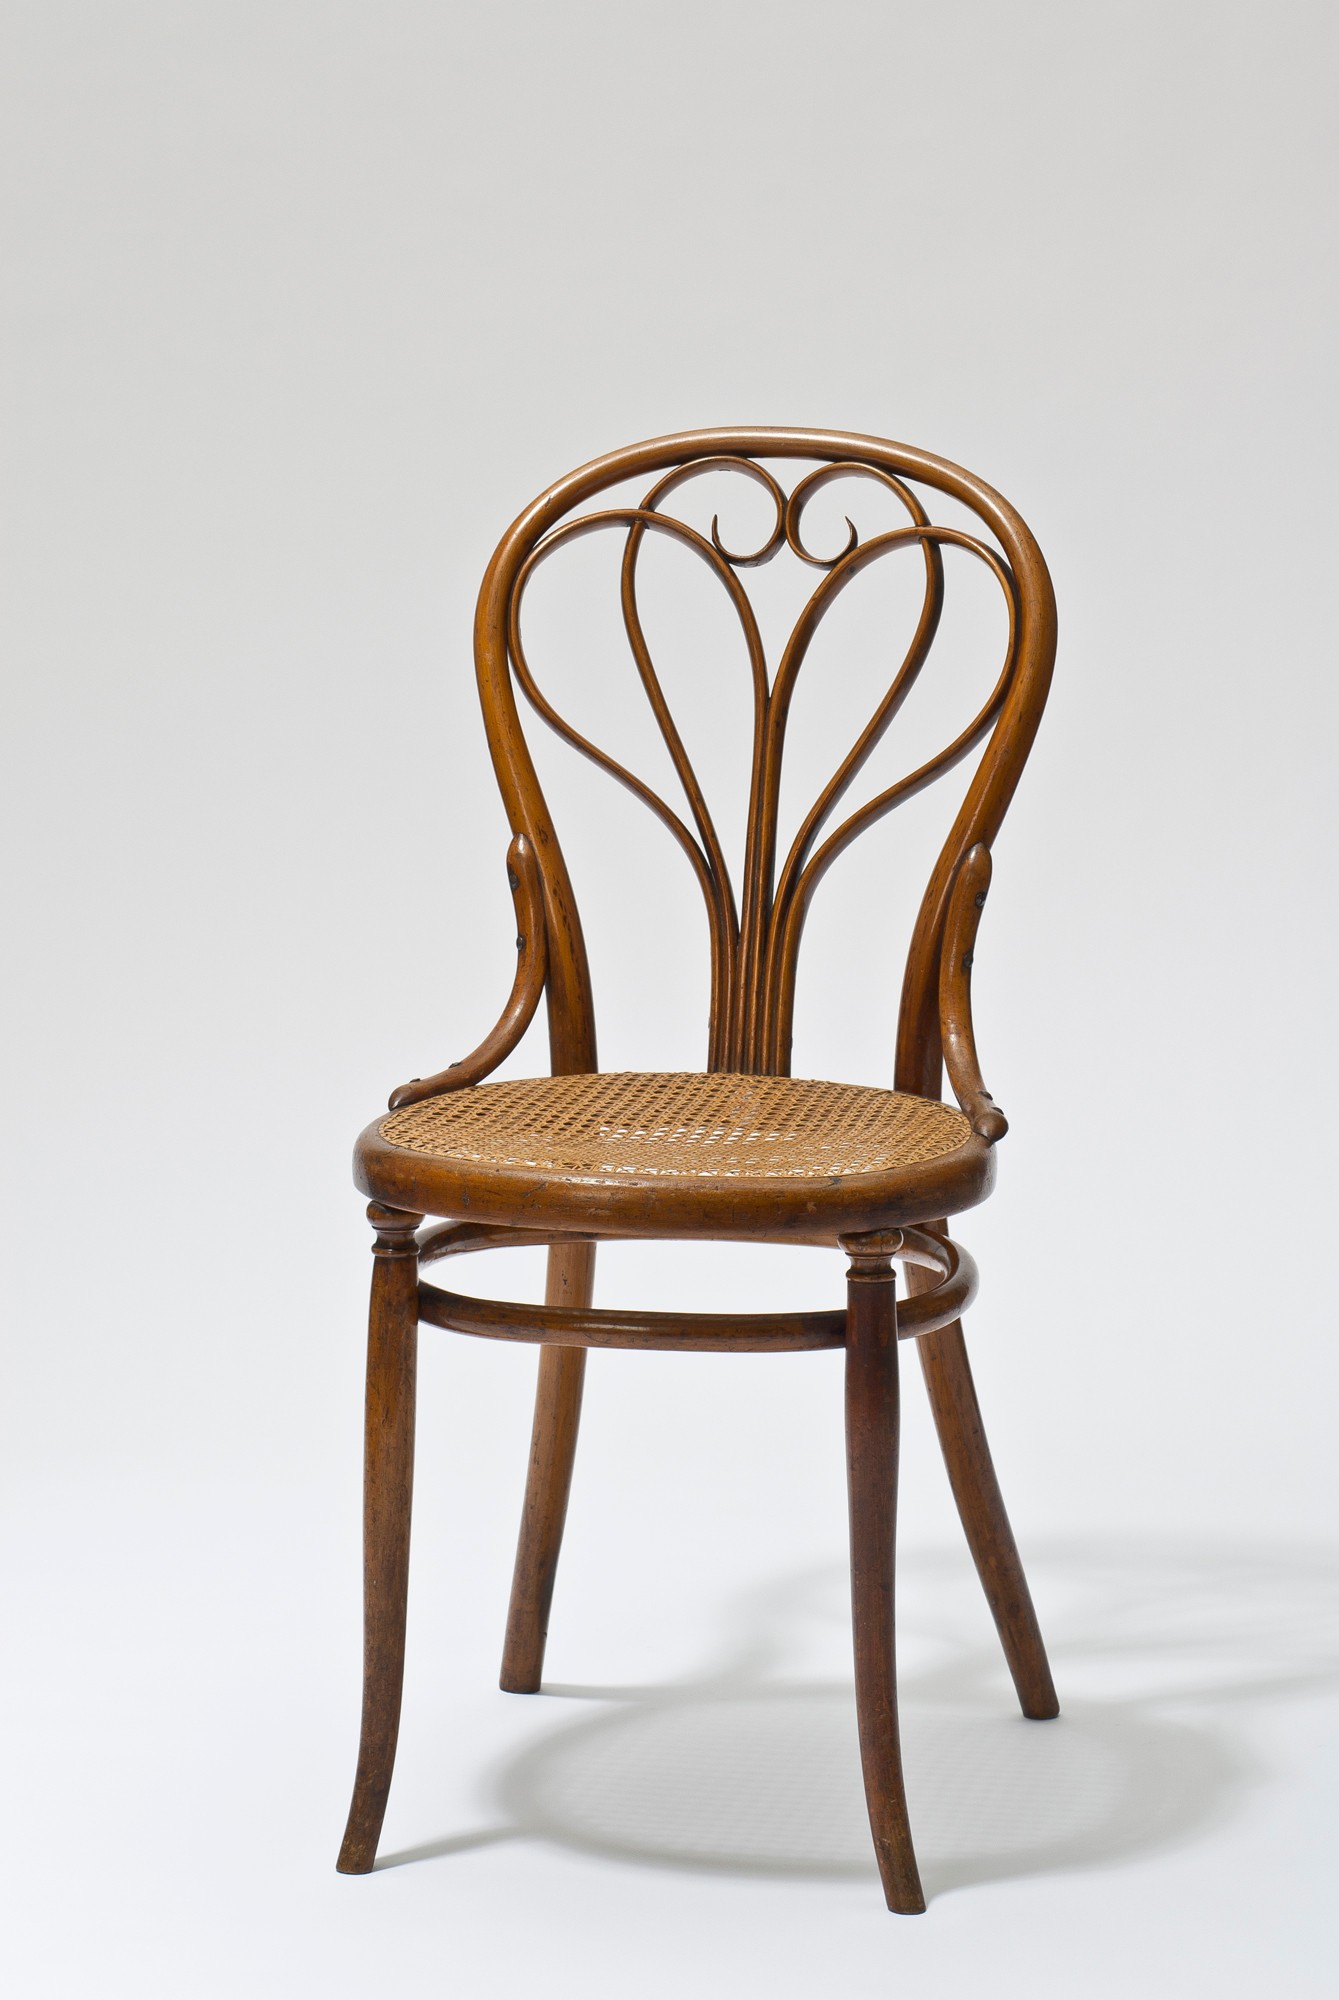 <BODY><div>CHAIR, MODEL NO. 25</div><div>Vienna, ca. 1910</div><div>Manufacture: Mundus</div><div>Beechwood, stained brown, partly bent, woven cane</div><div>H 2186 / 1969, donation Austrian Federal Economic Chamber</div></BODY>